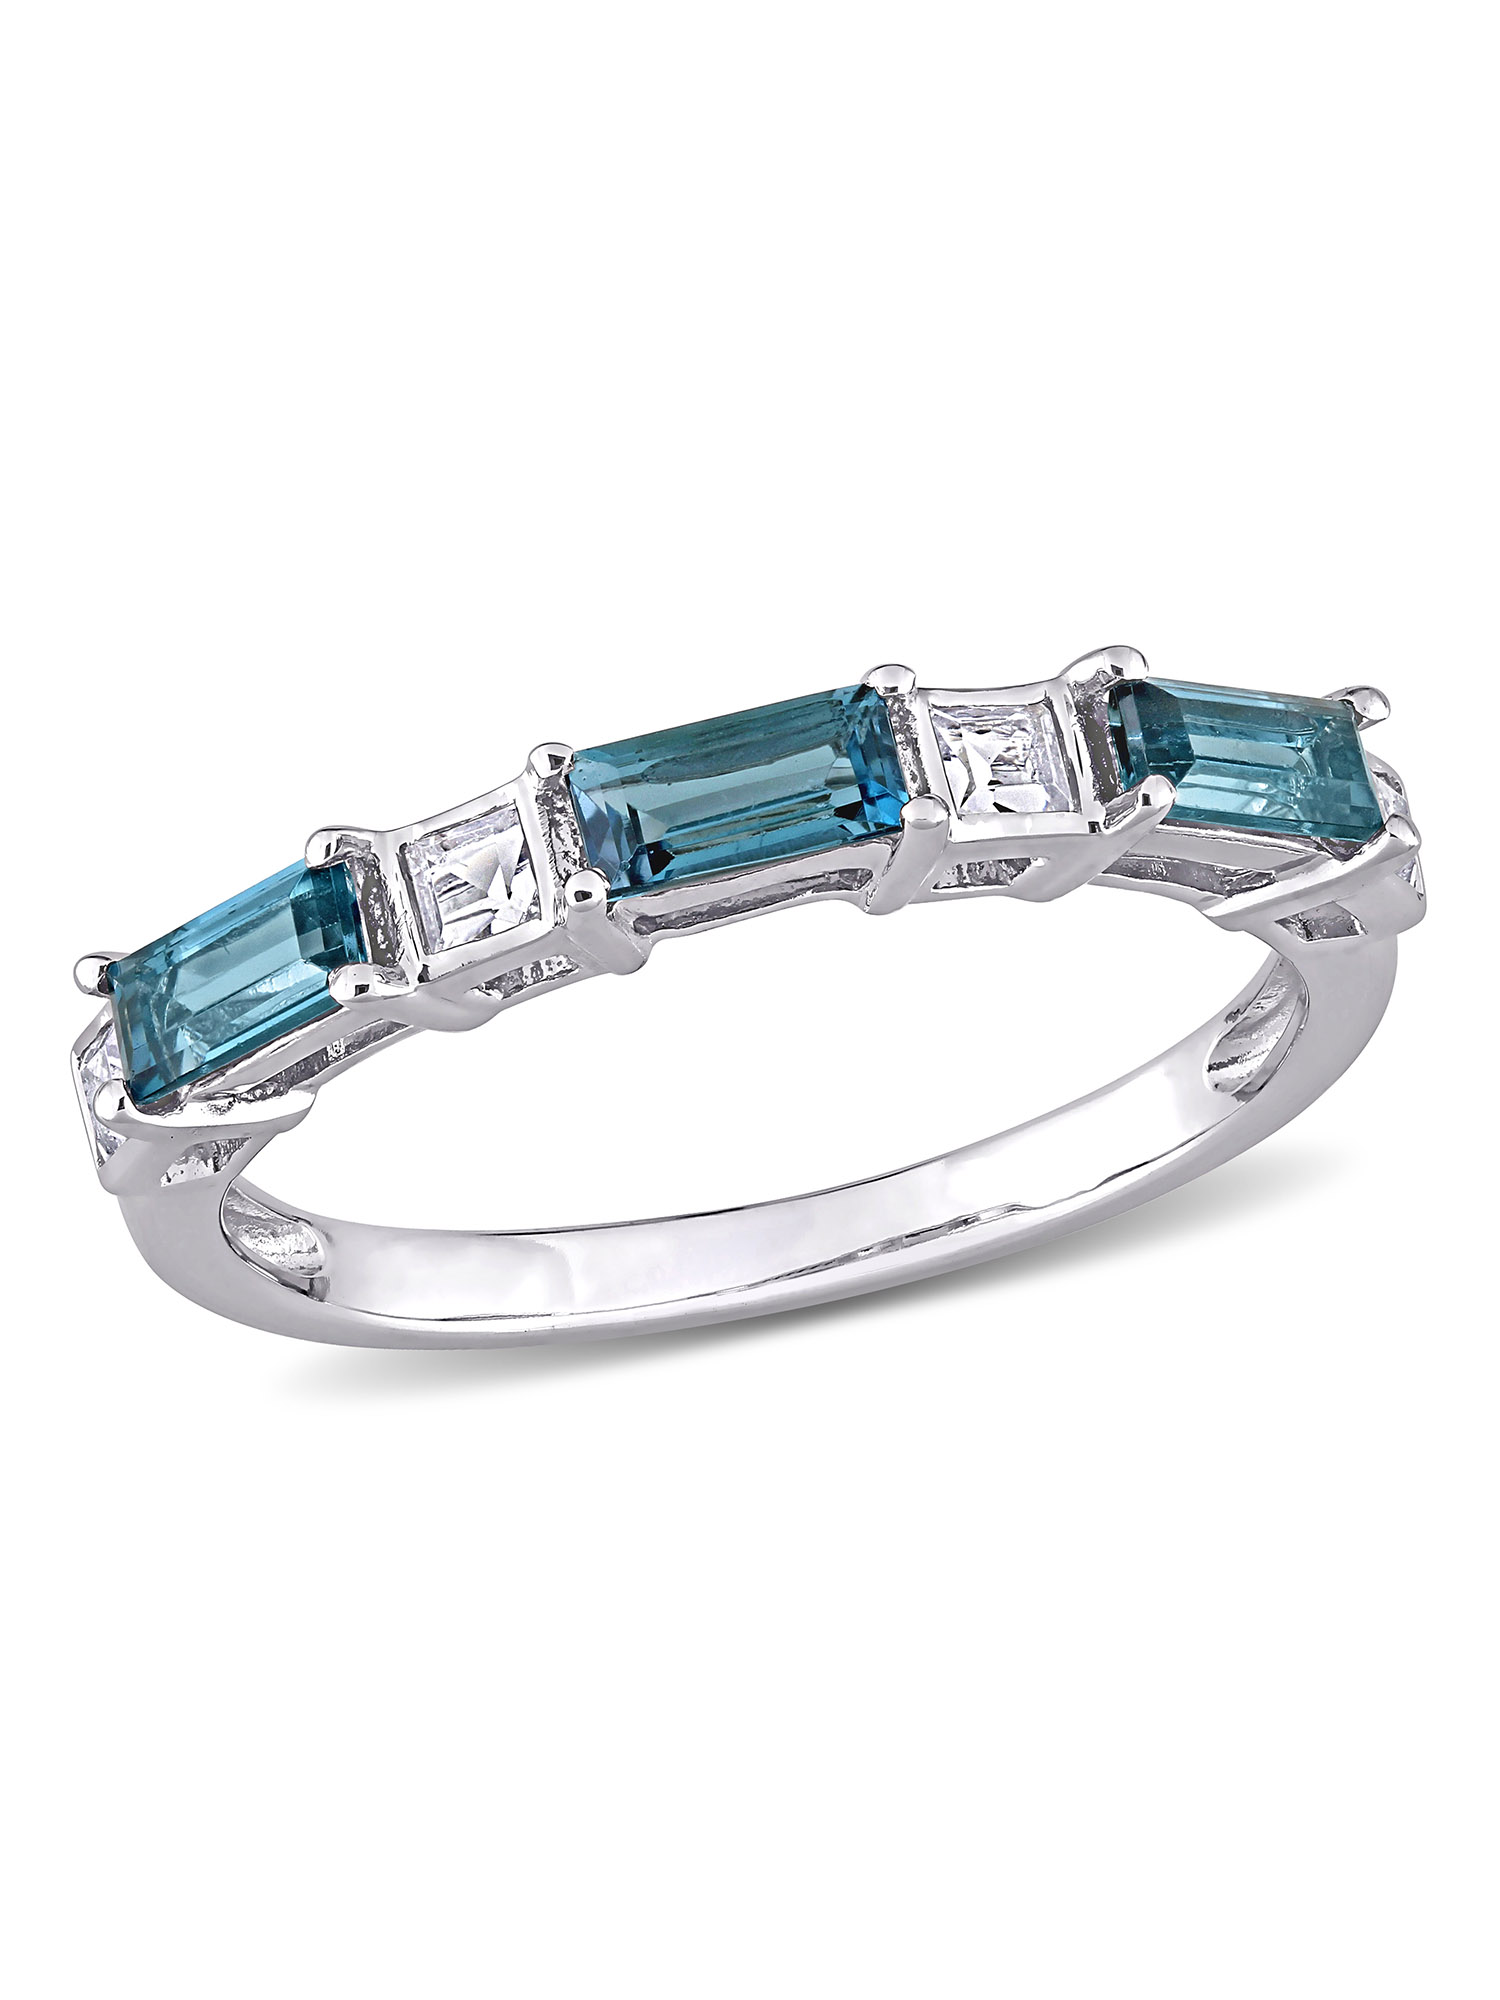 Everly Everly Women's 1.06 Carat T.G.W. Blue Topaz London and White ...